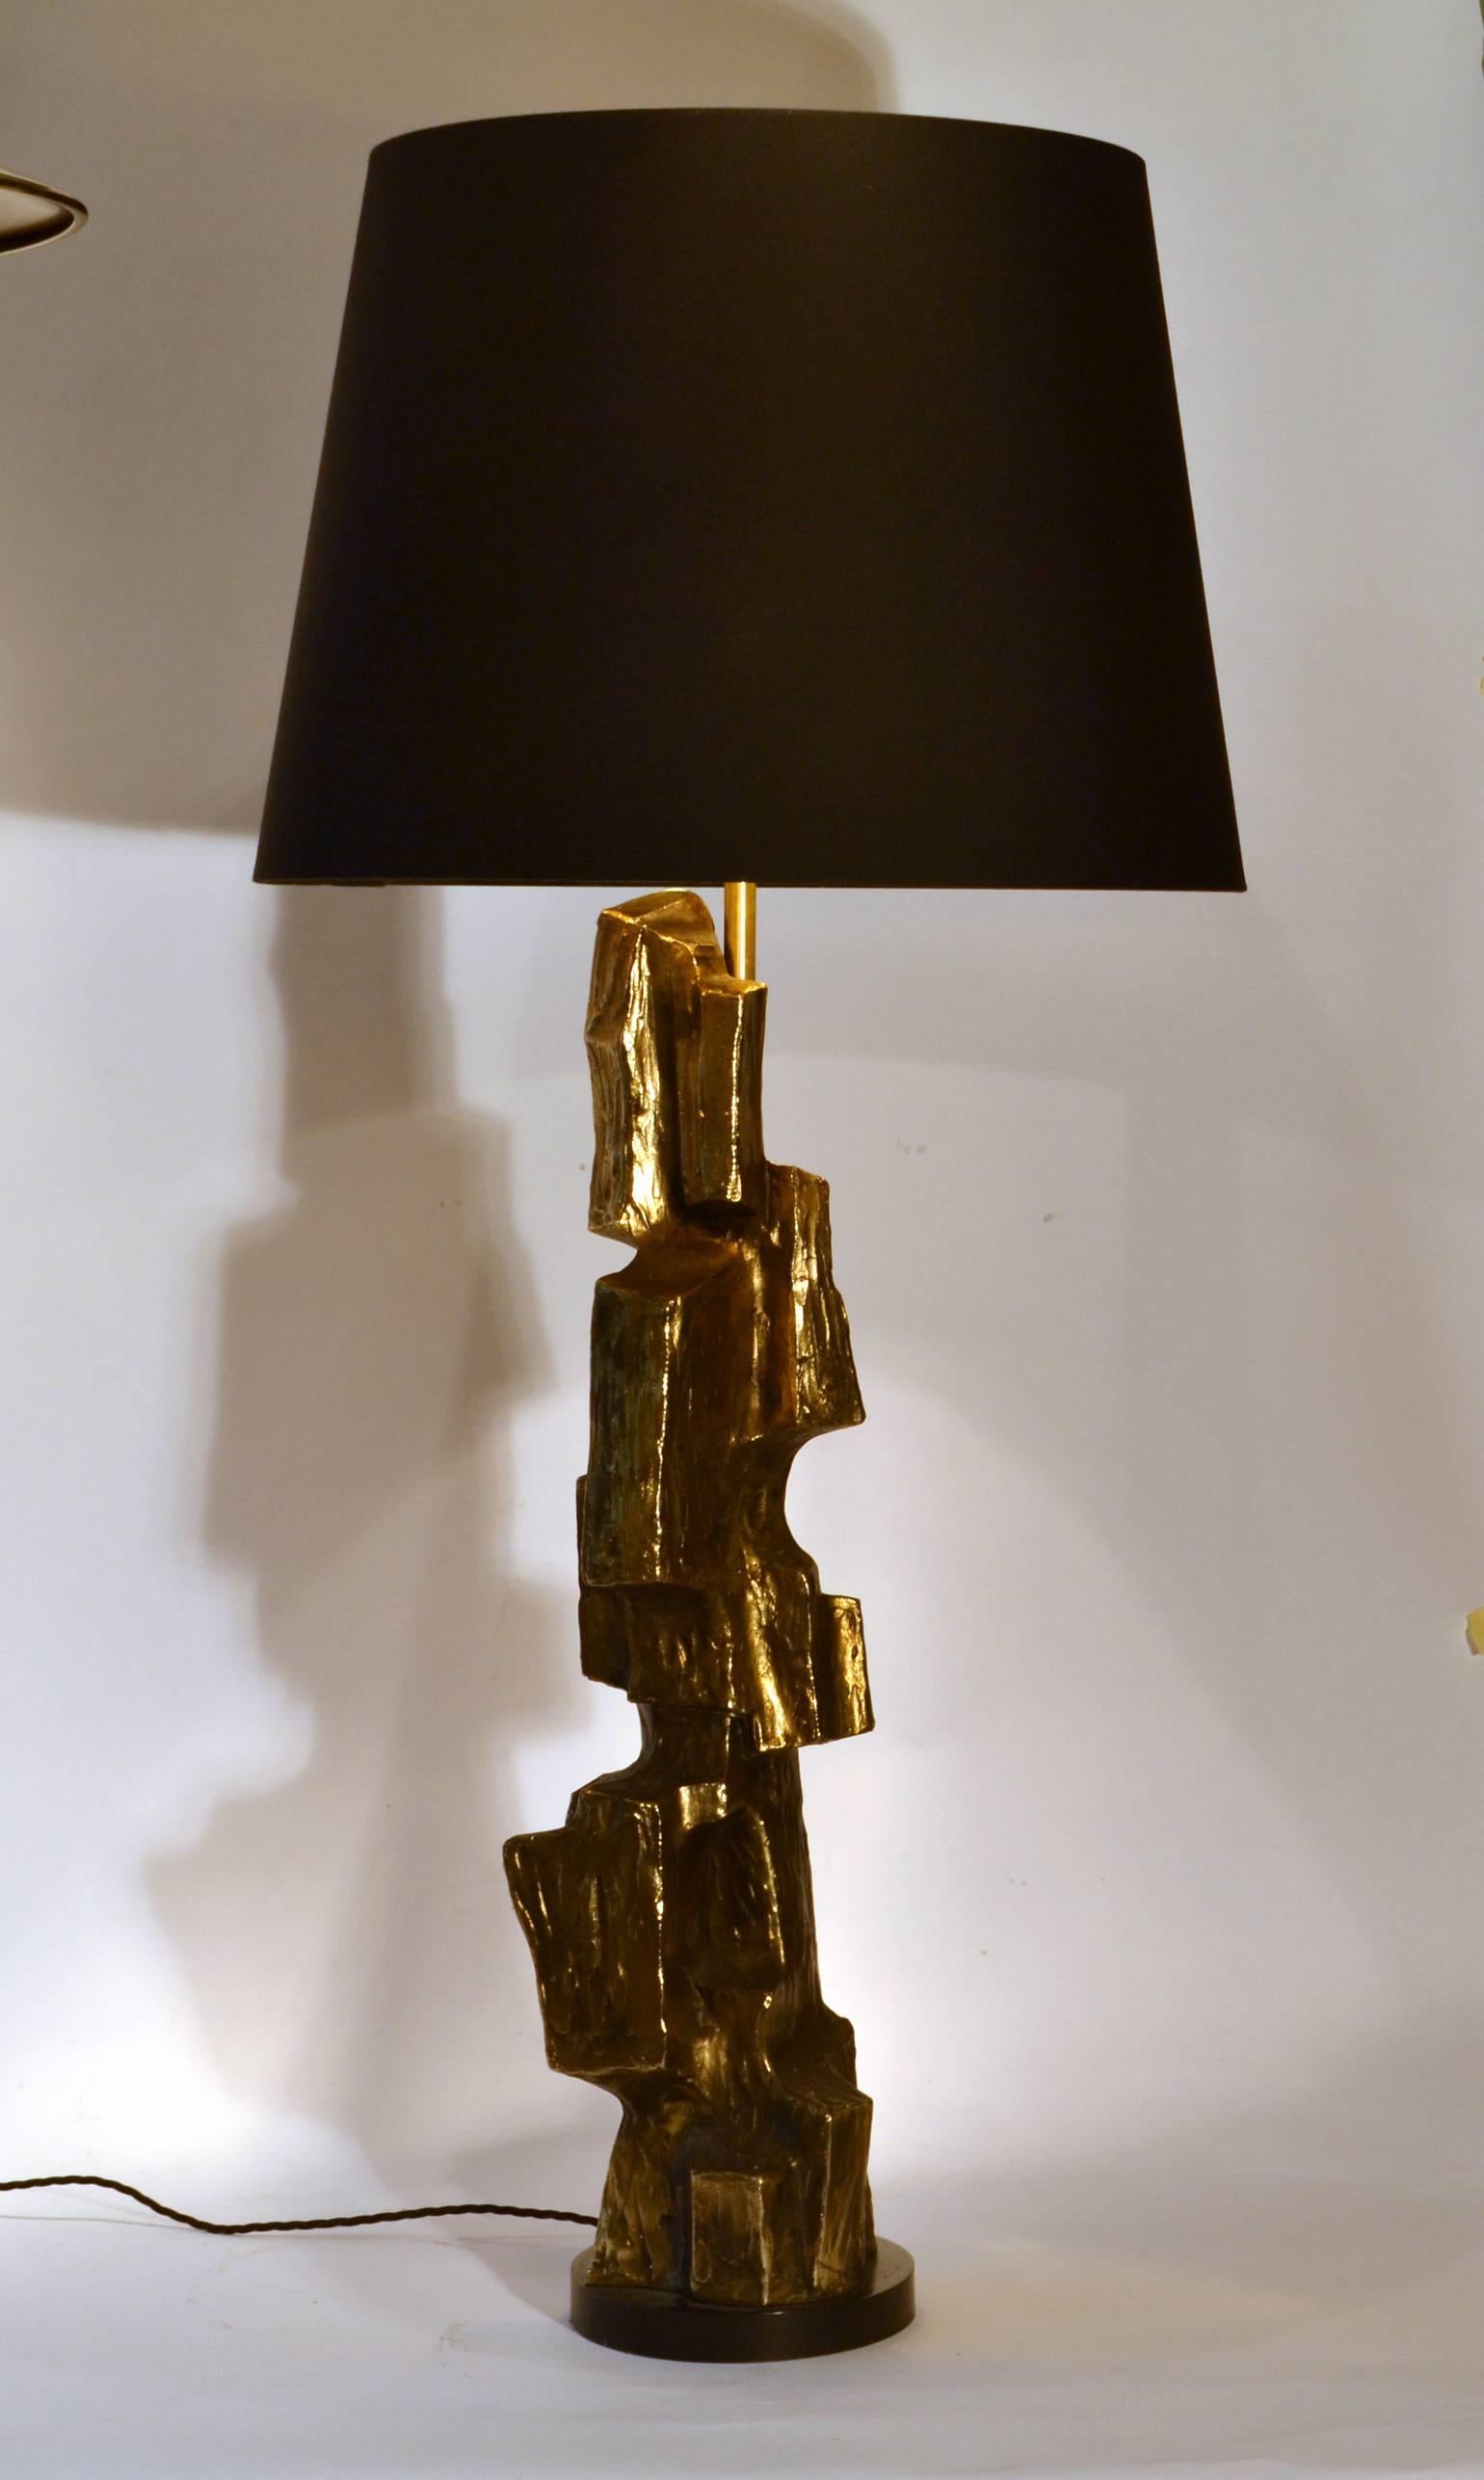 Tall sculptural lamp base finished in bronze patina over textural cast metal body. Base is wood finished in satin black lacquer. Brutalist table lamp designed by Maurizio Tempestini for Laurel Lamp Company, 1970s.
The lamp comes with an ivory silk